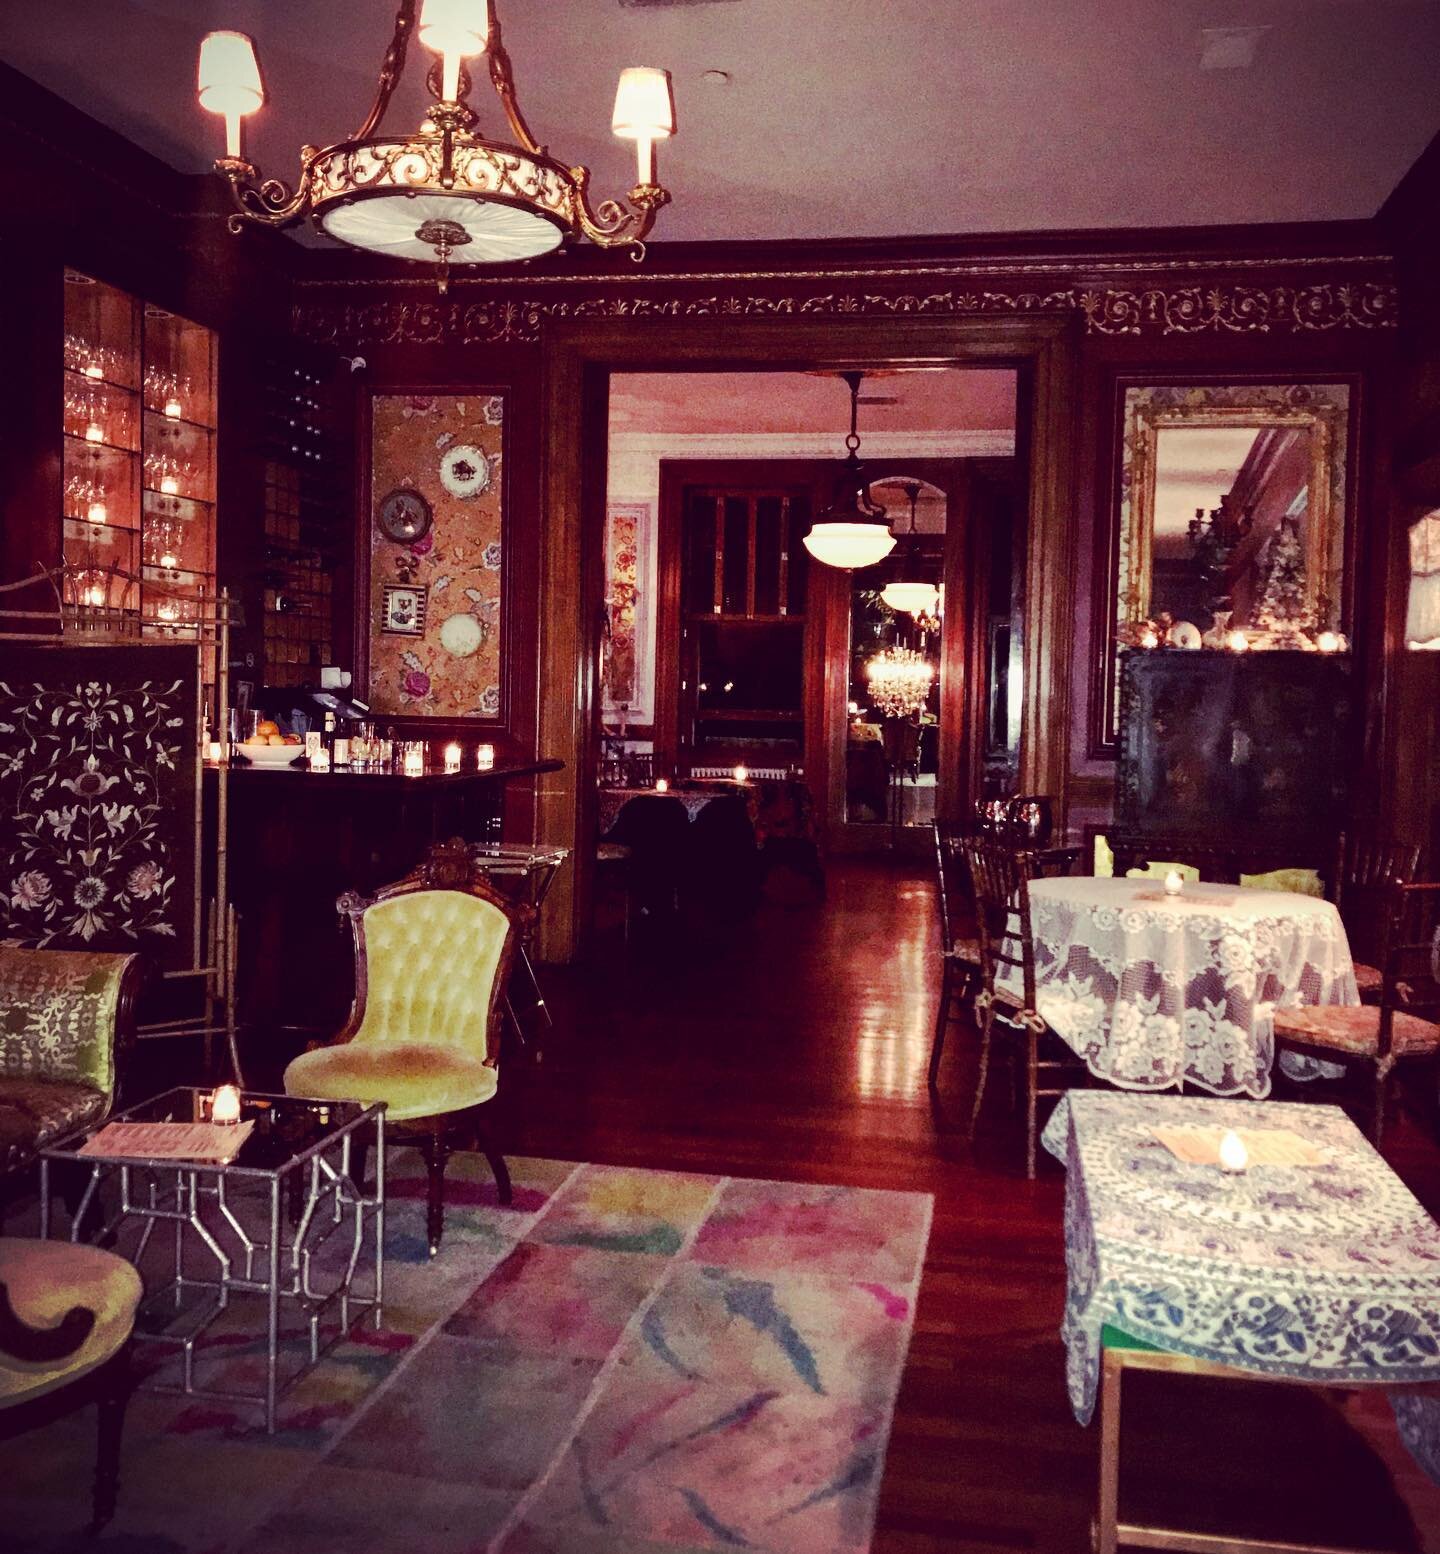 The Inn at Irving Place also hosts events in our salon just above @cibarlounge. Our salon has its own private bar and bathrooms with a capacity of up to 65 people. Send us an email to host your holiday event with us!